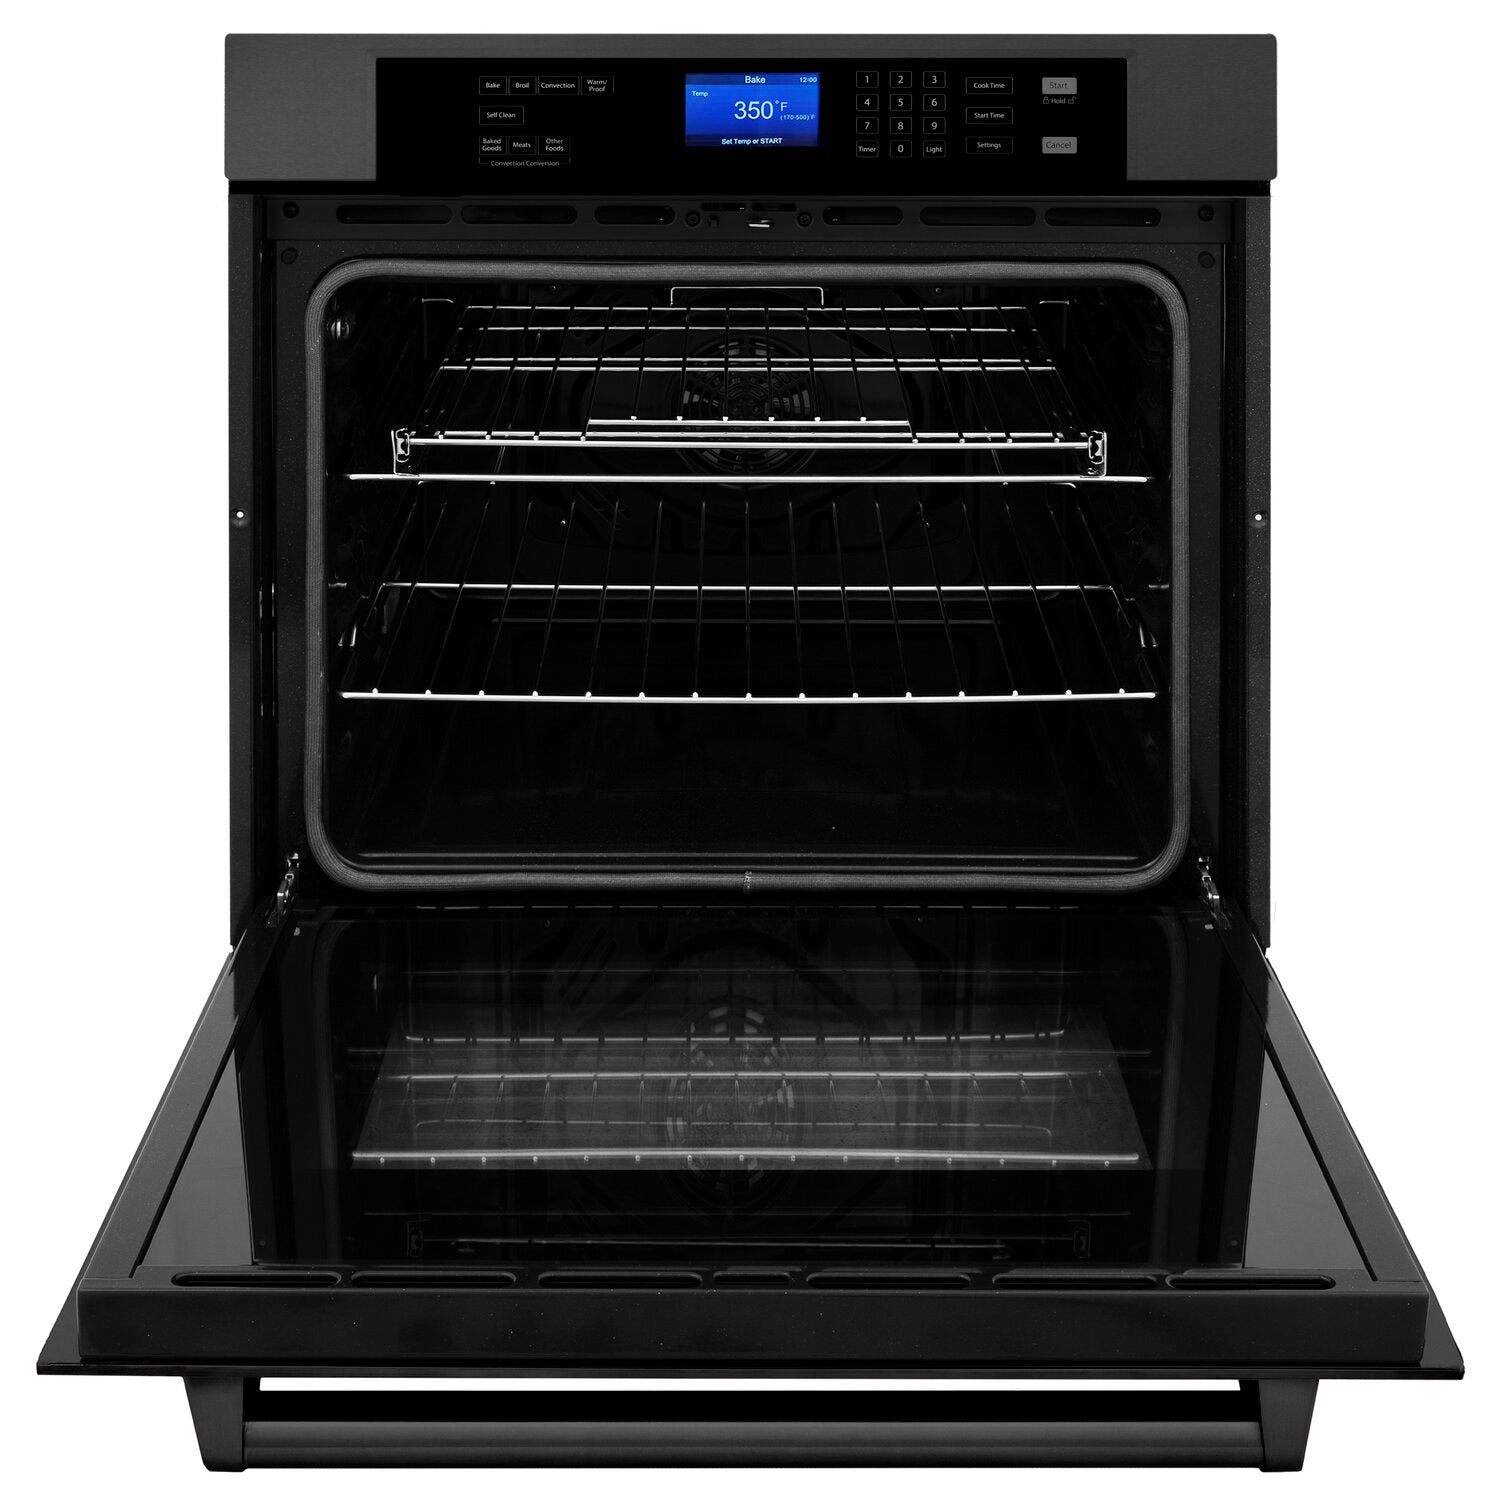 ZLINE Professional 30" Black Stainless Steel Electric Convection Single Wall Oven With Self Clean Technology